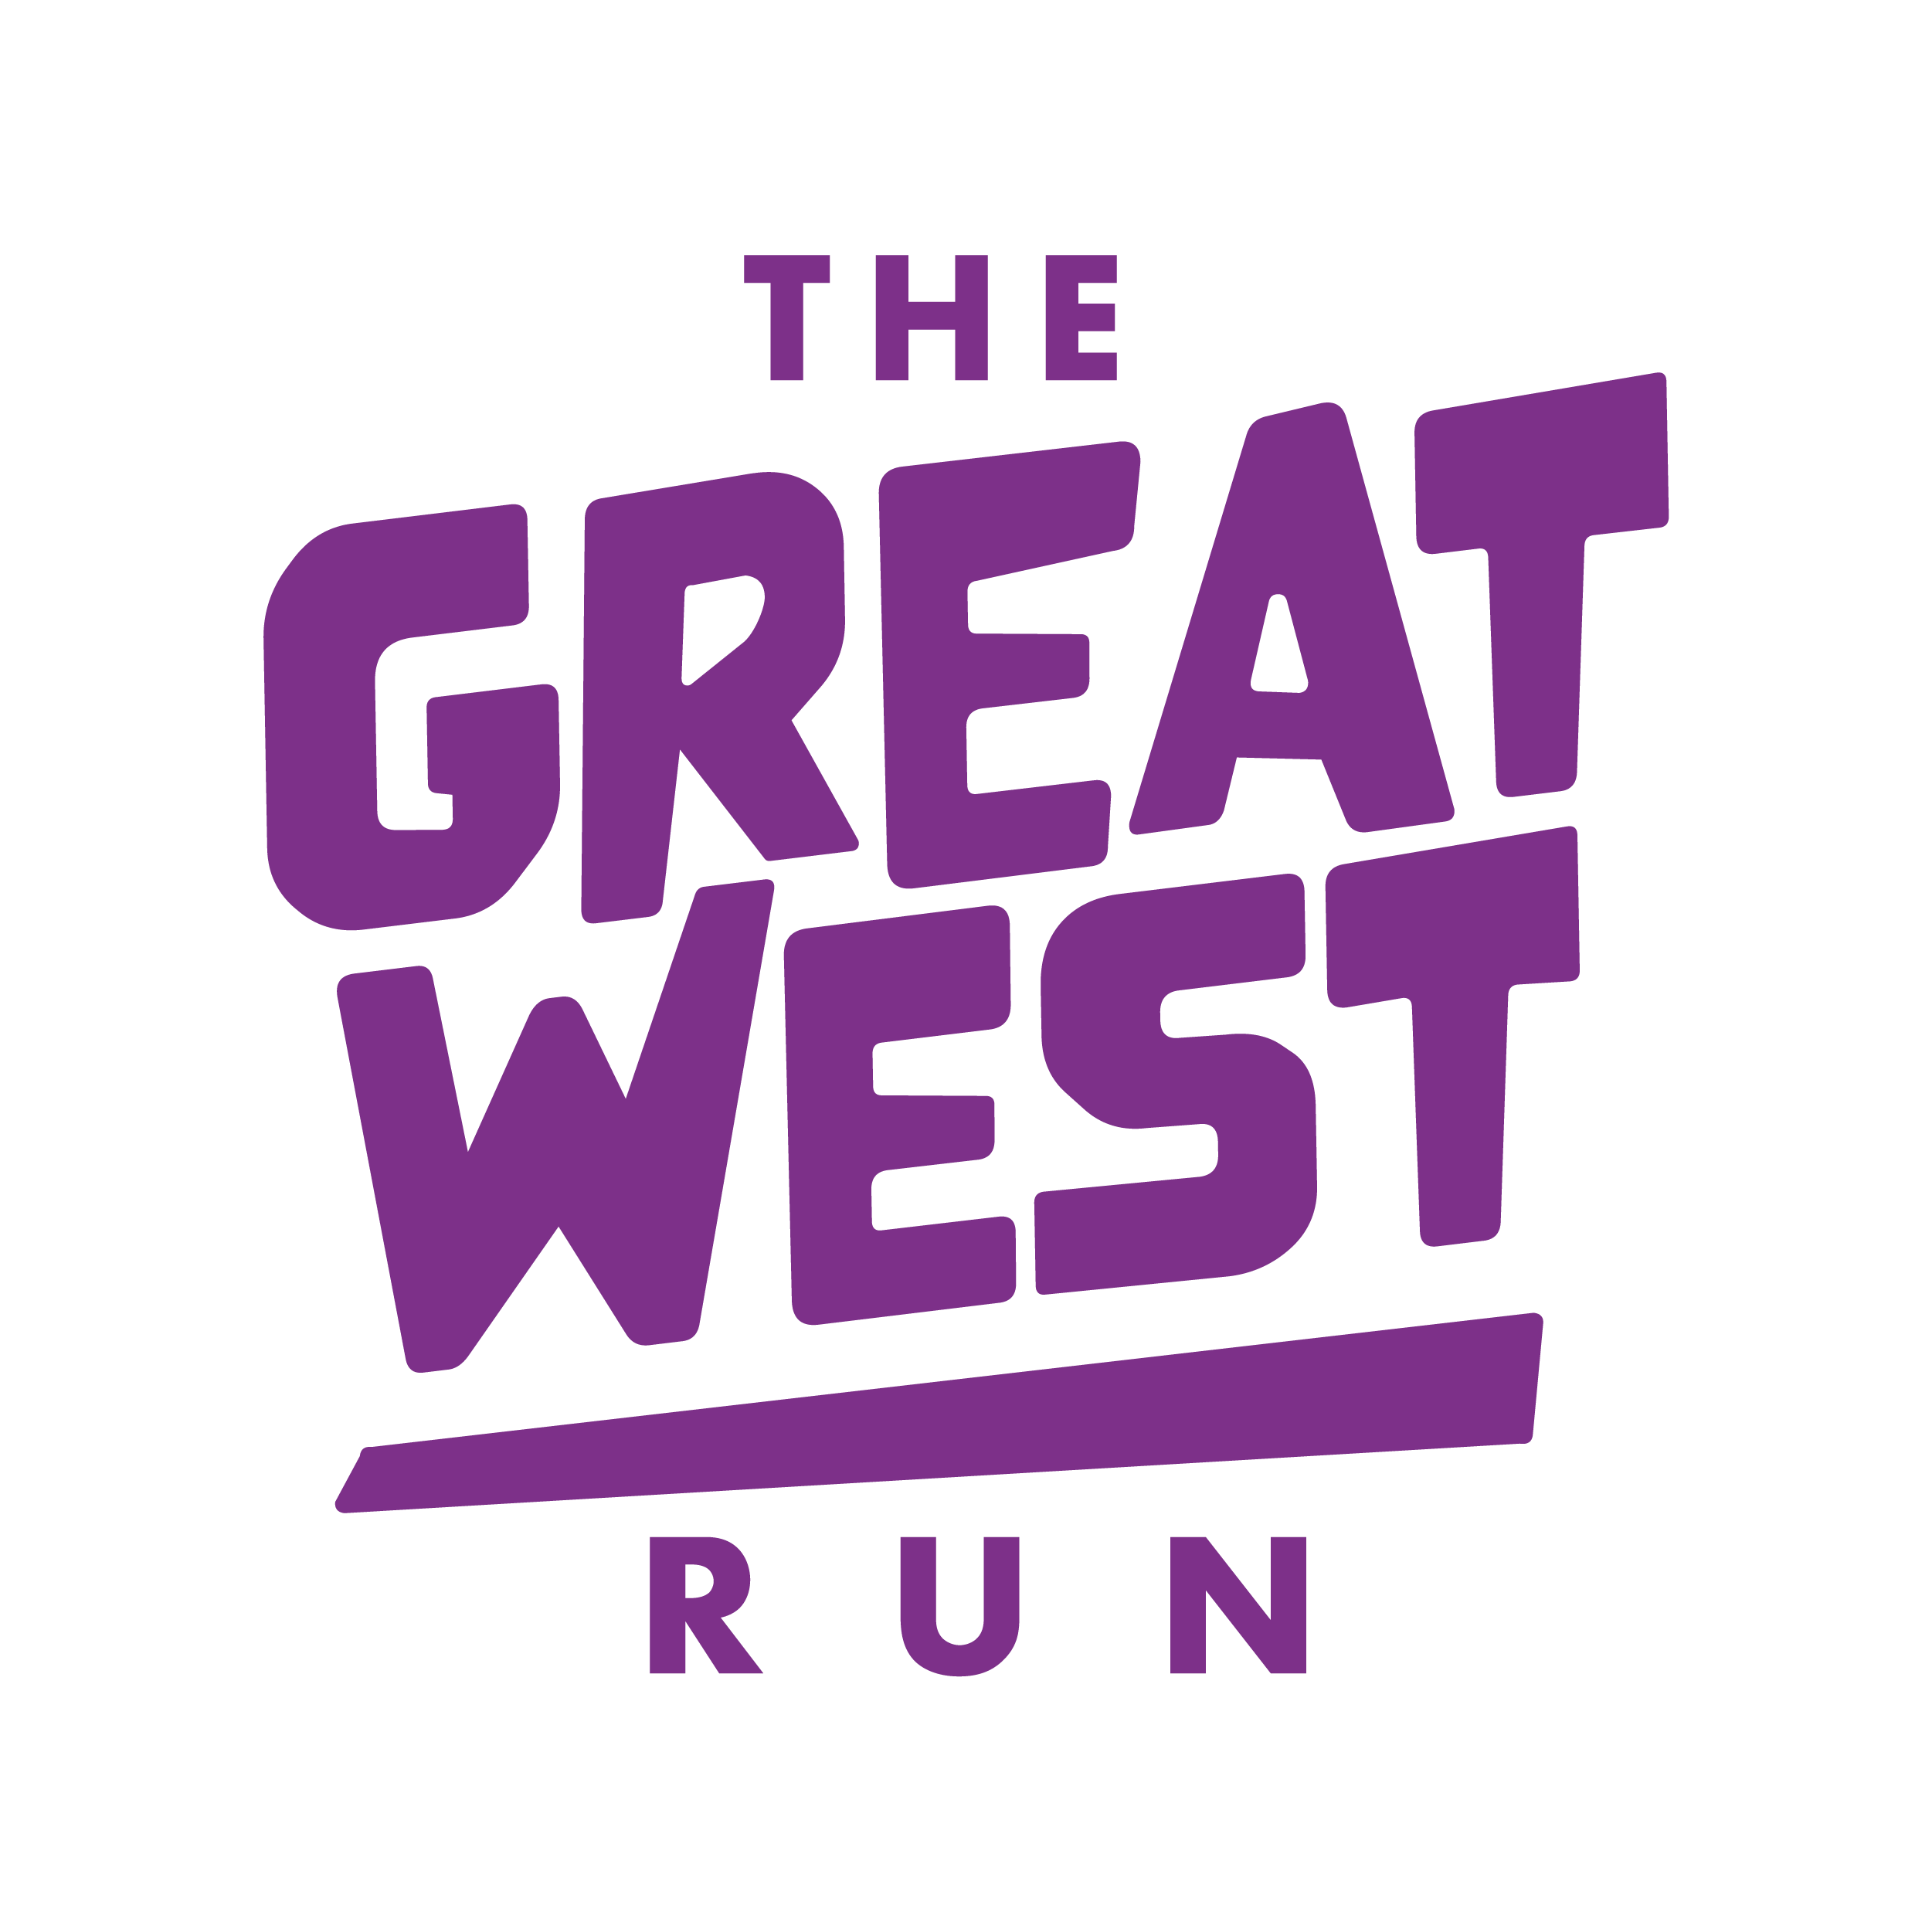 The Great West Run 10K